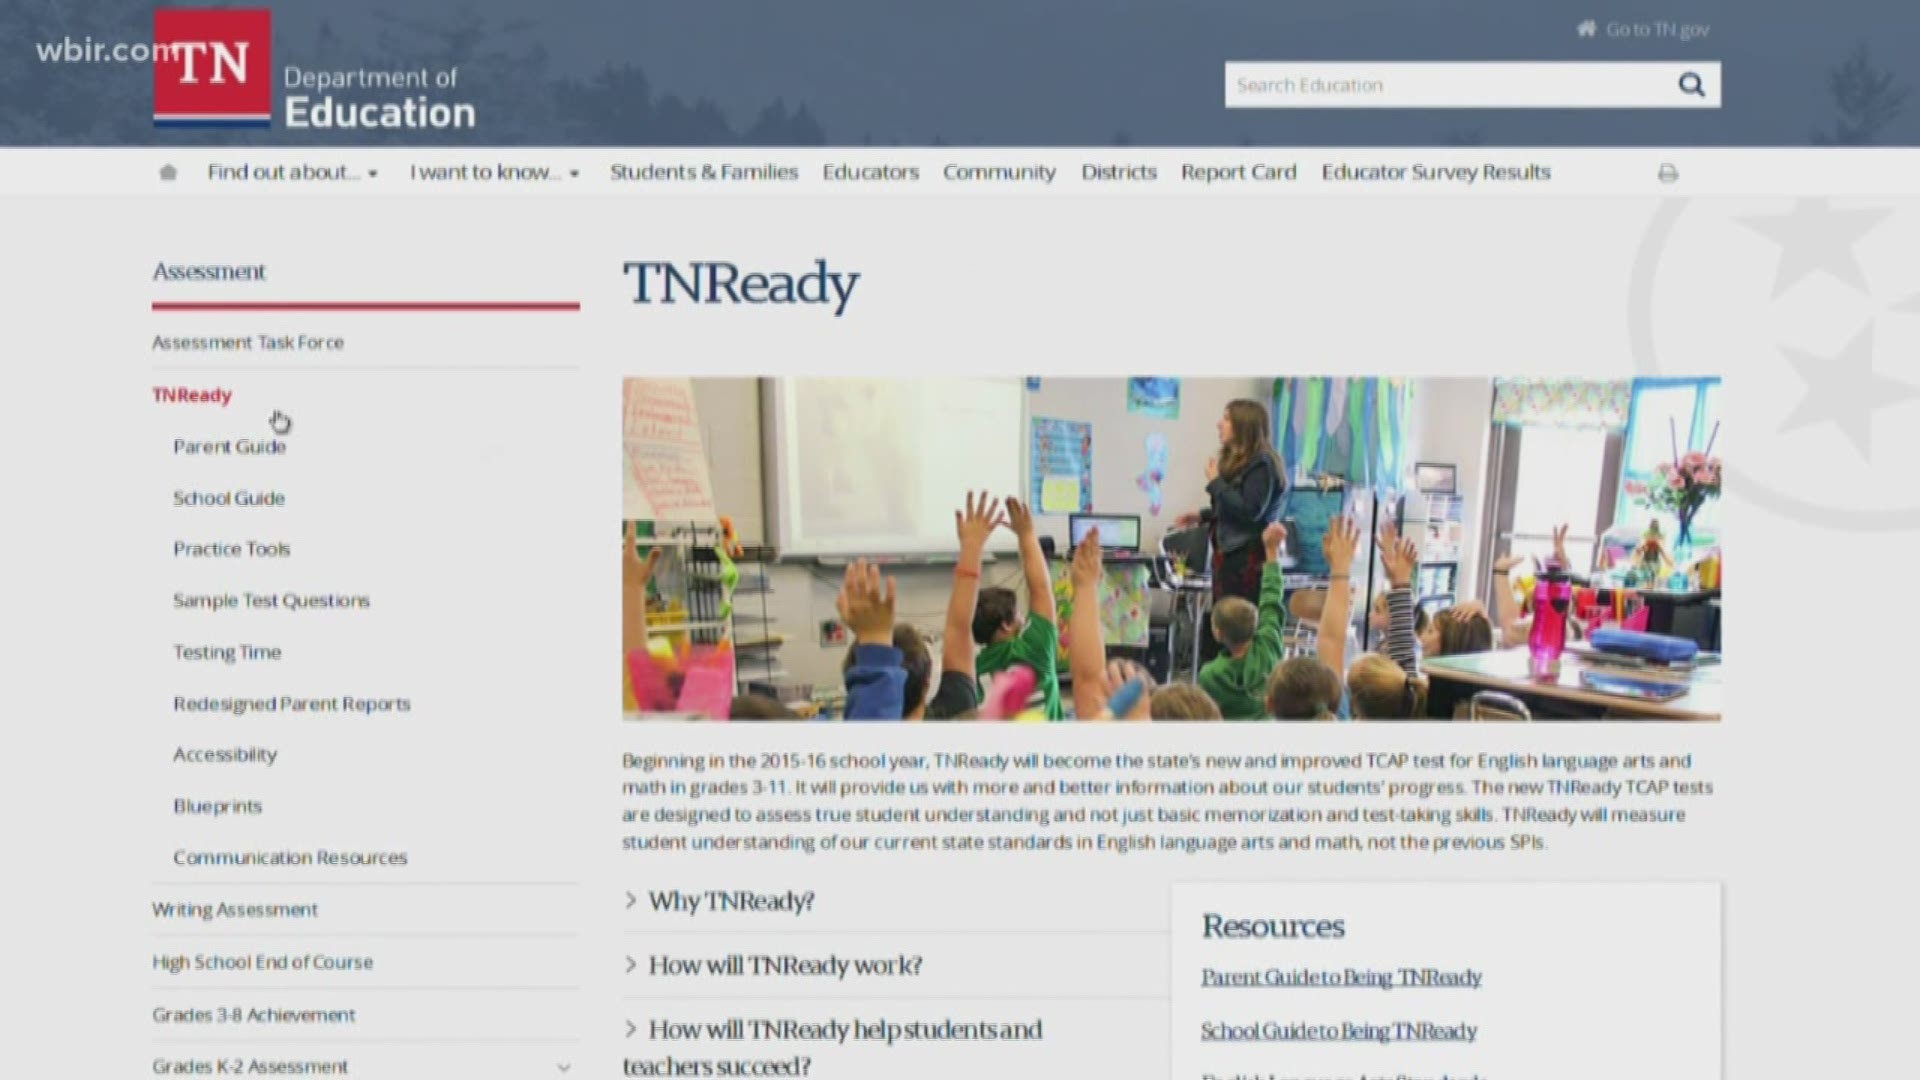 April 19, 2018: Lawmakers voted for TNReady results not to count against students, teachers and schools this year after days of issues with the testing platform. Still, thousands of students will have to complete the testing.